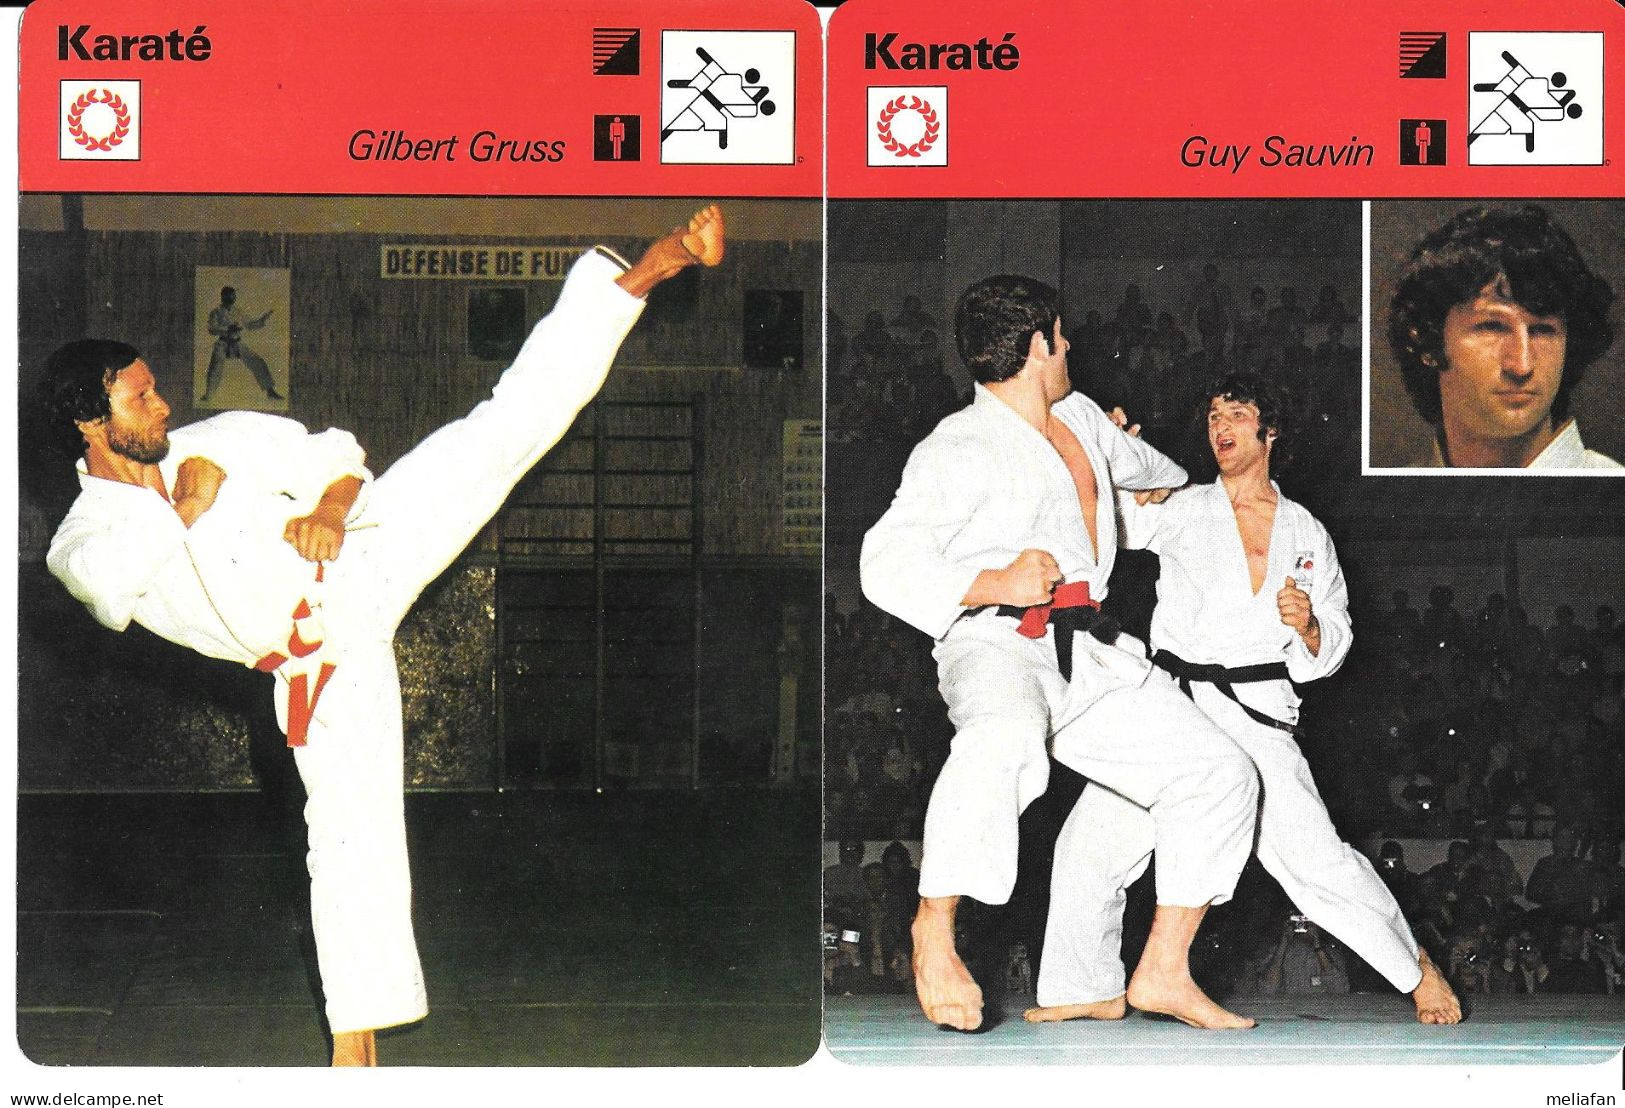 GF1785 - FICHES EDITION RENCONTRE - KARATE - GILBERT GRUSS - GUY SAUVIN - ROGER PASCHY - JEAN LUC MAMI - Artes Marciales